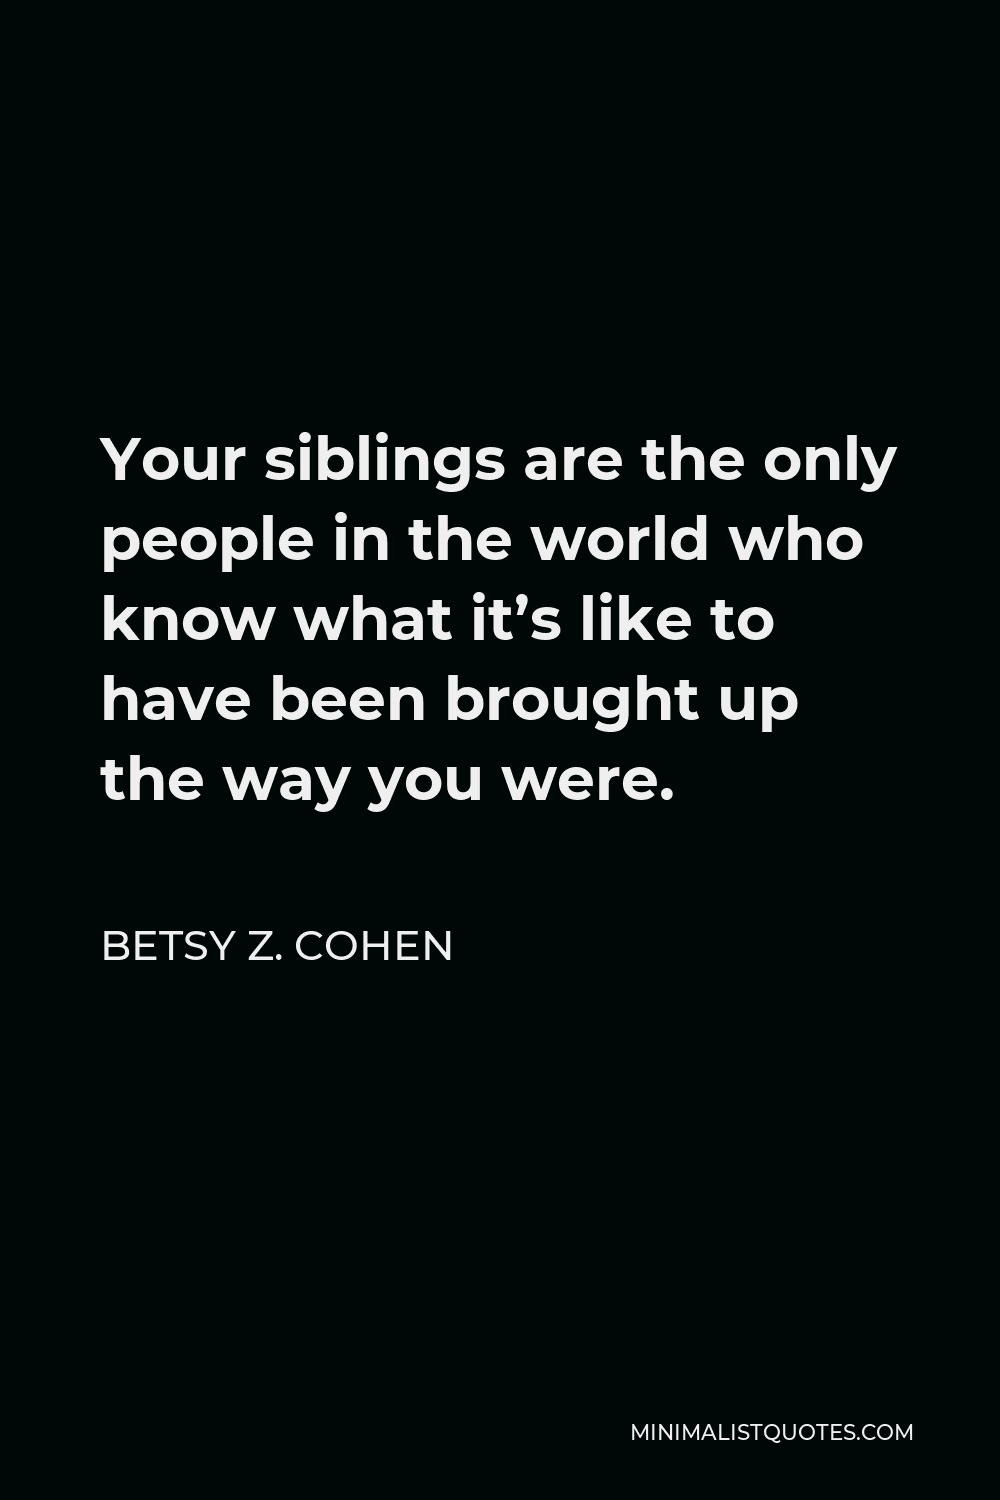 Betsy Z. Cohen Quote - Your siblings are the only people in the world who know what it’s like to have been brought up the way you were.